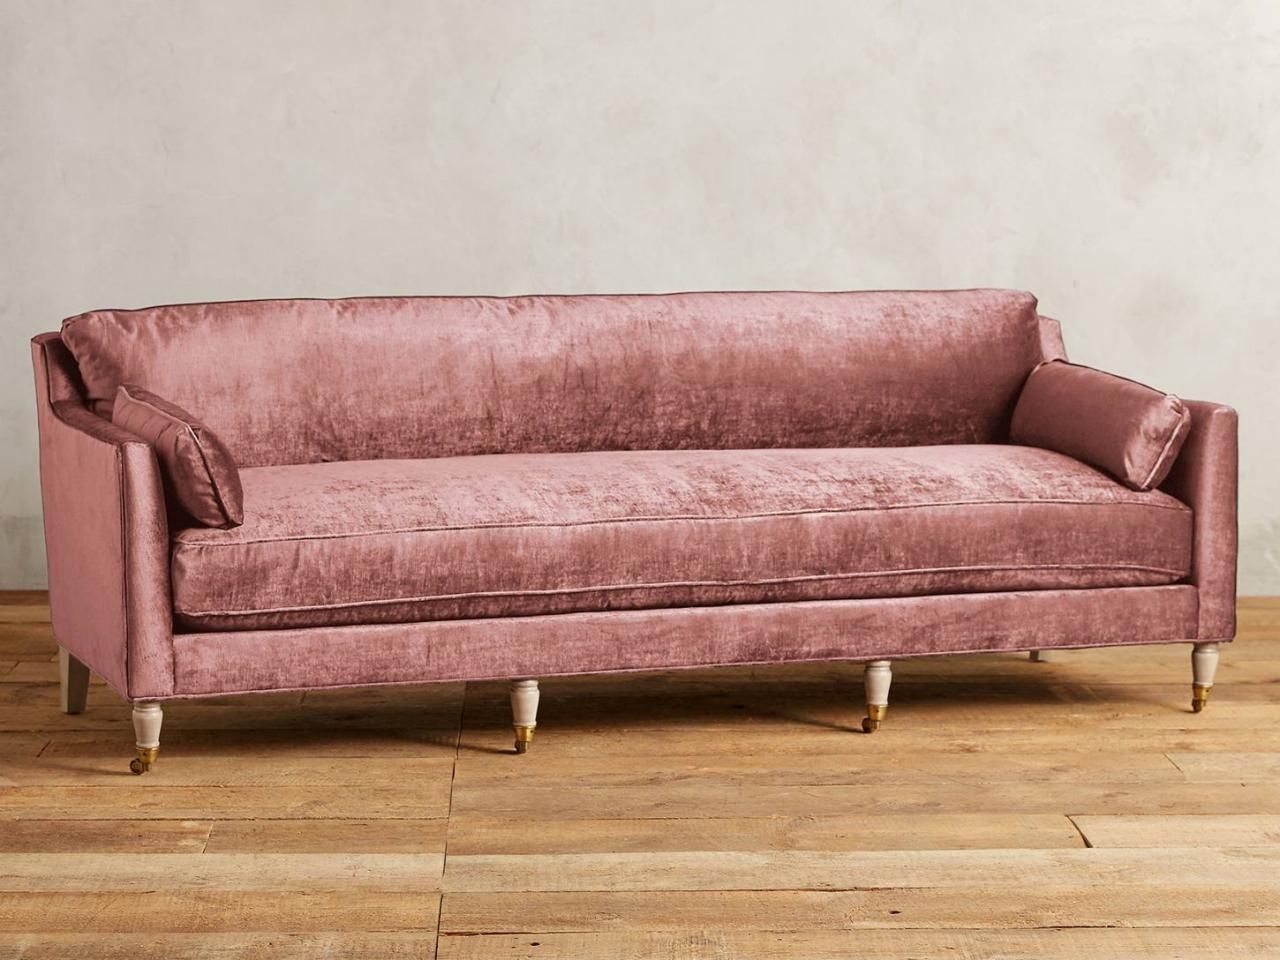 11 Of The Best Velvet Sofas To Decorate With | Hgtv's Decorating With Regard To Velvet Sofas (View 10 of 10)